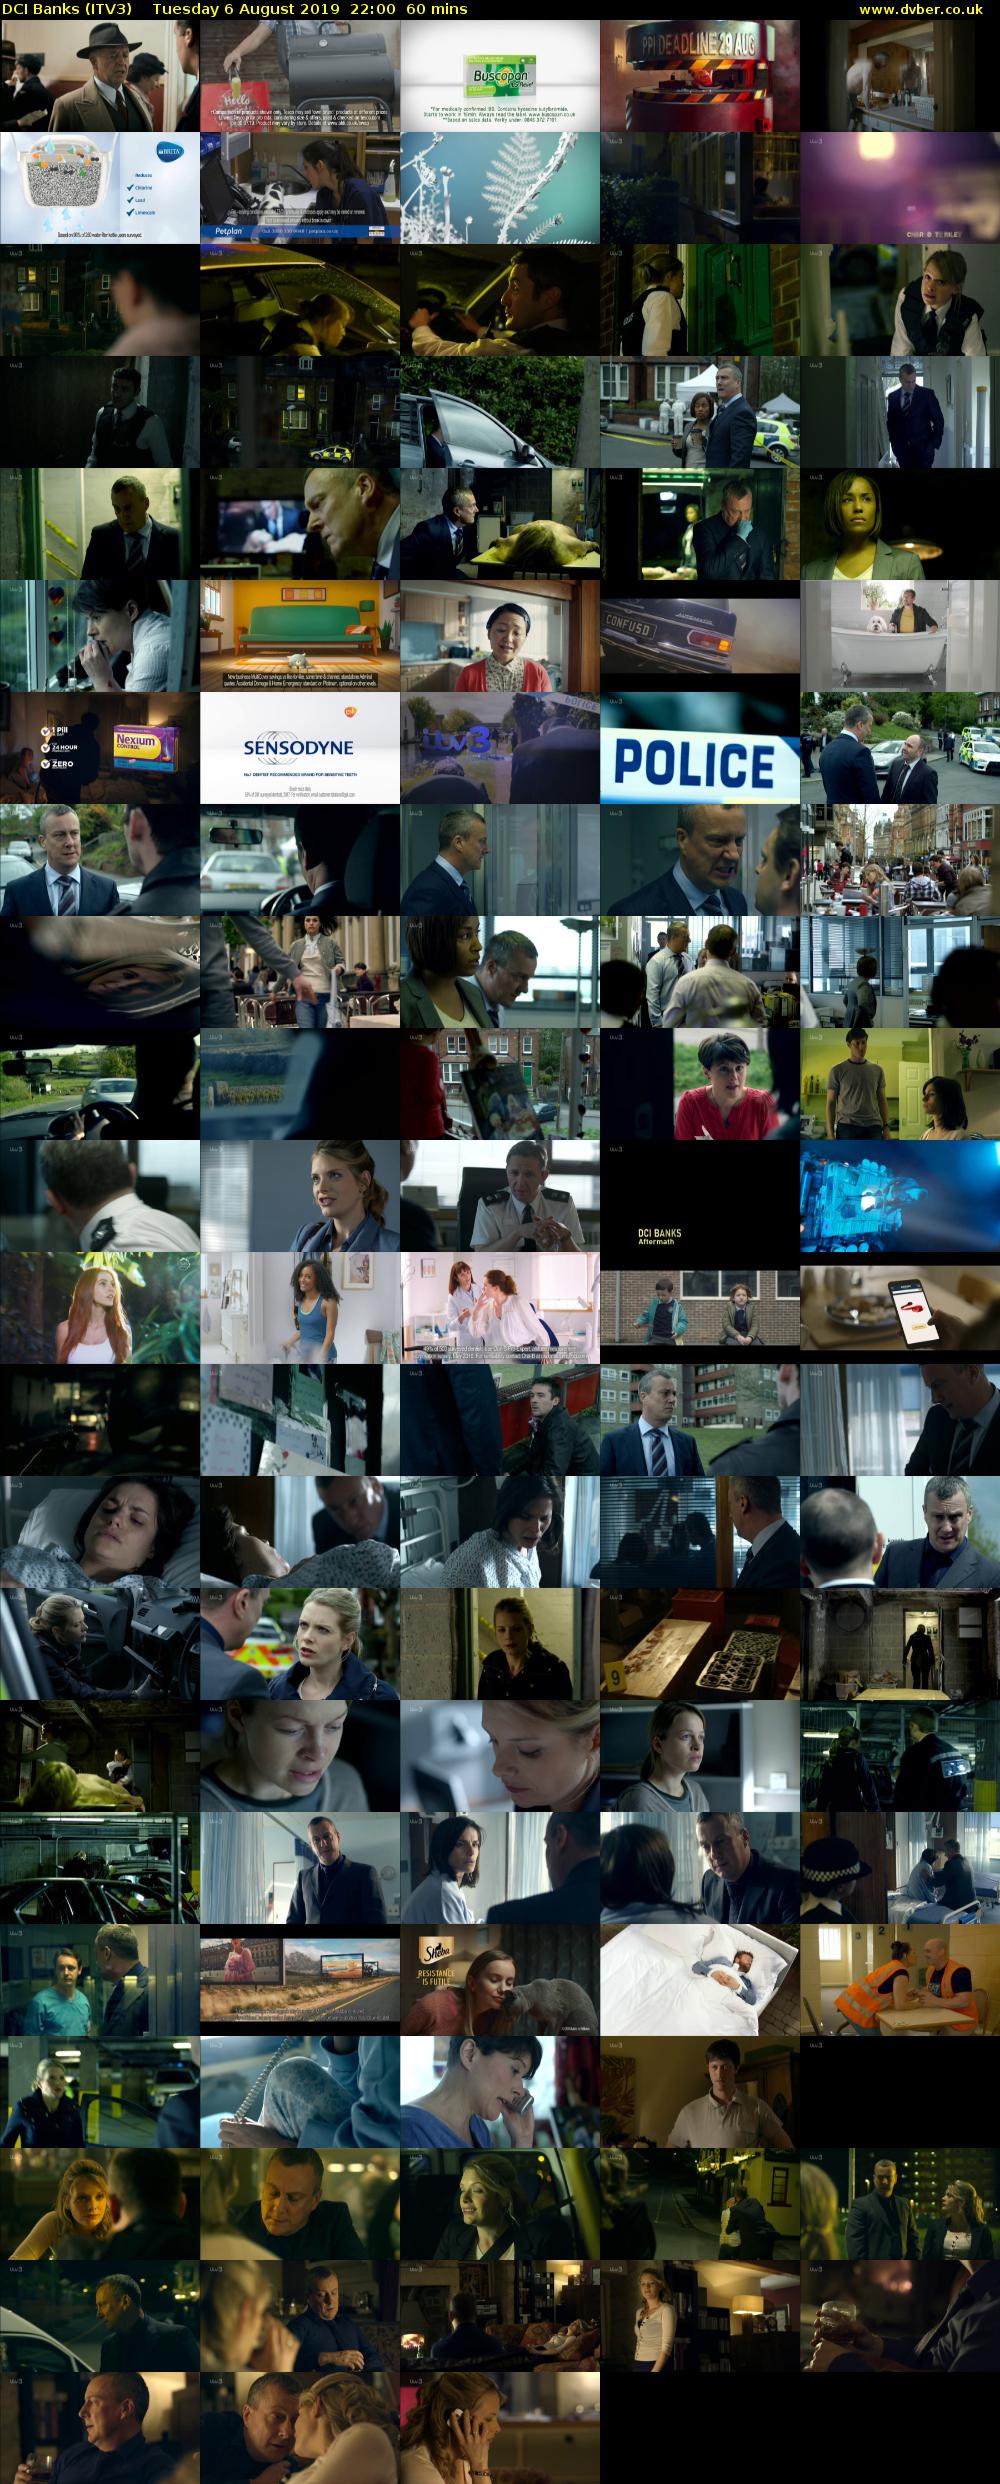 DCI Banks (ITV3) Tuesday 6 August 2019 22:00 - 23:00